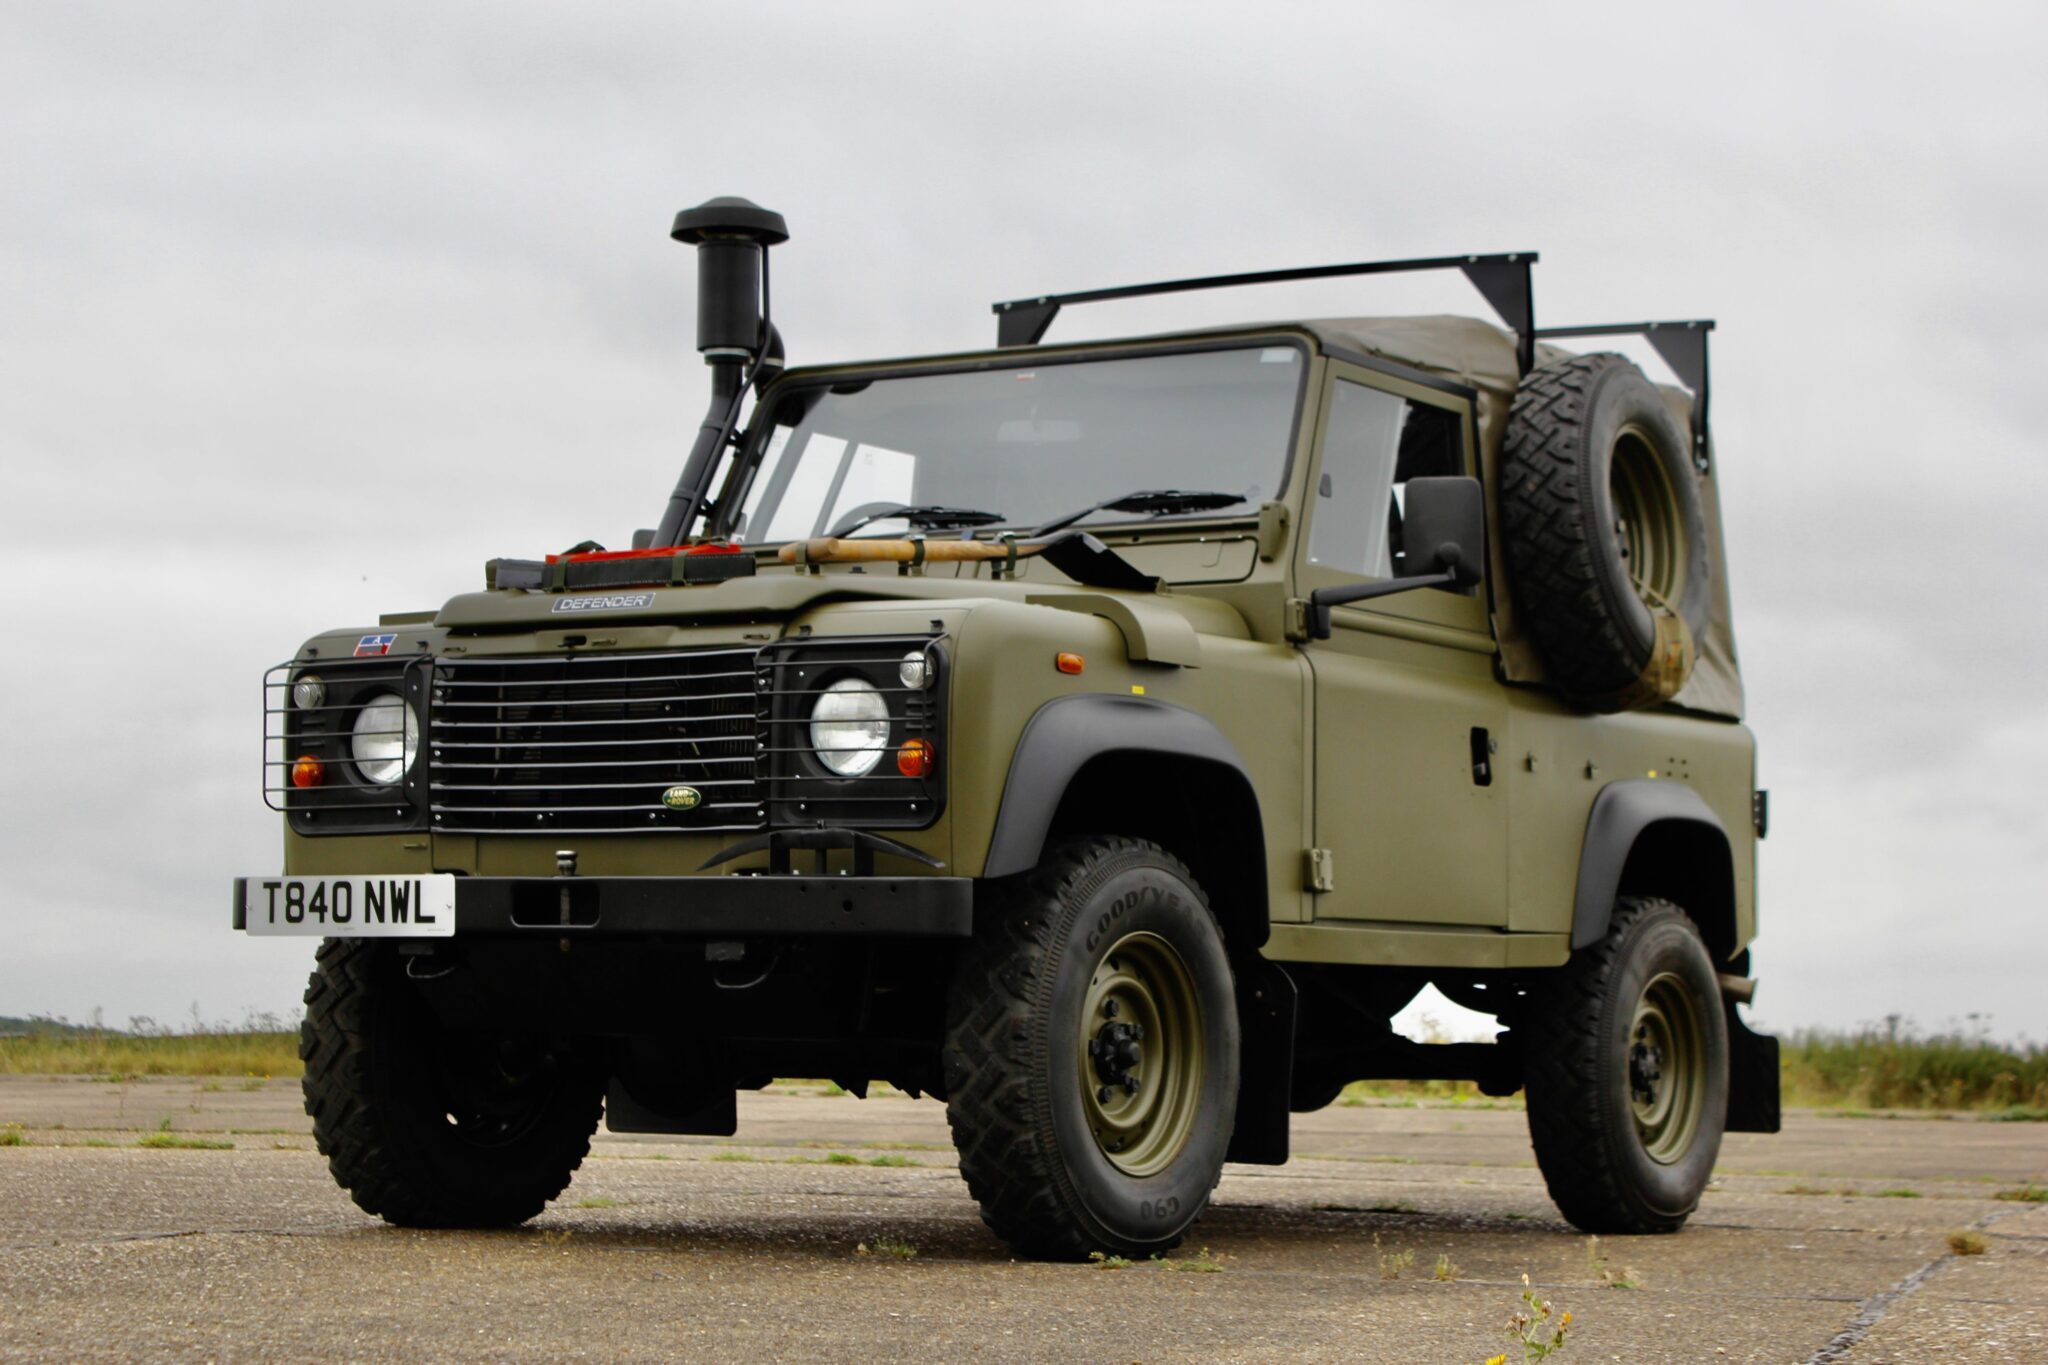 One of very few Land Rover Defender Winter Water Wolf parked in the gravel is one of the coolest vintage 4x4 SUVs ever made is for sale